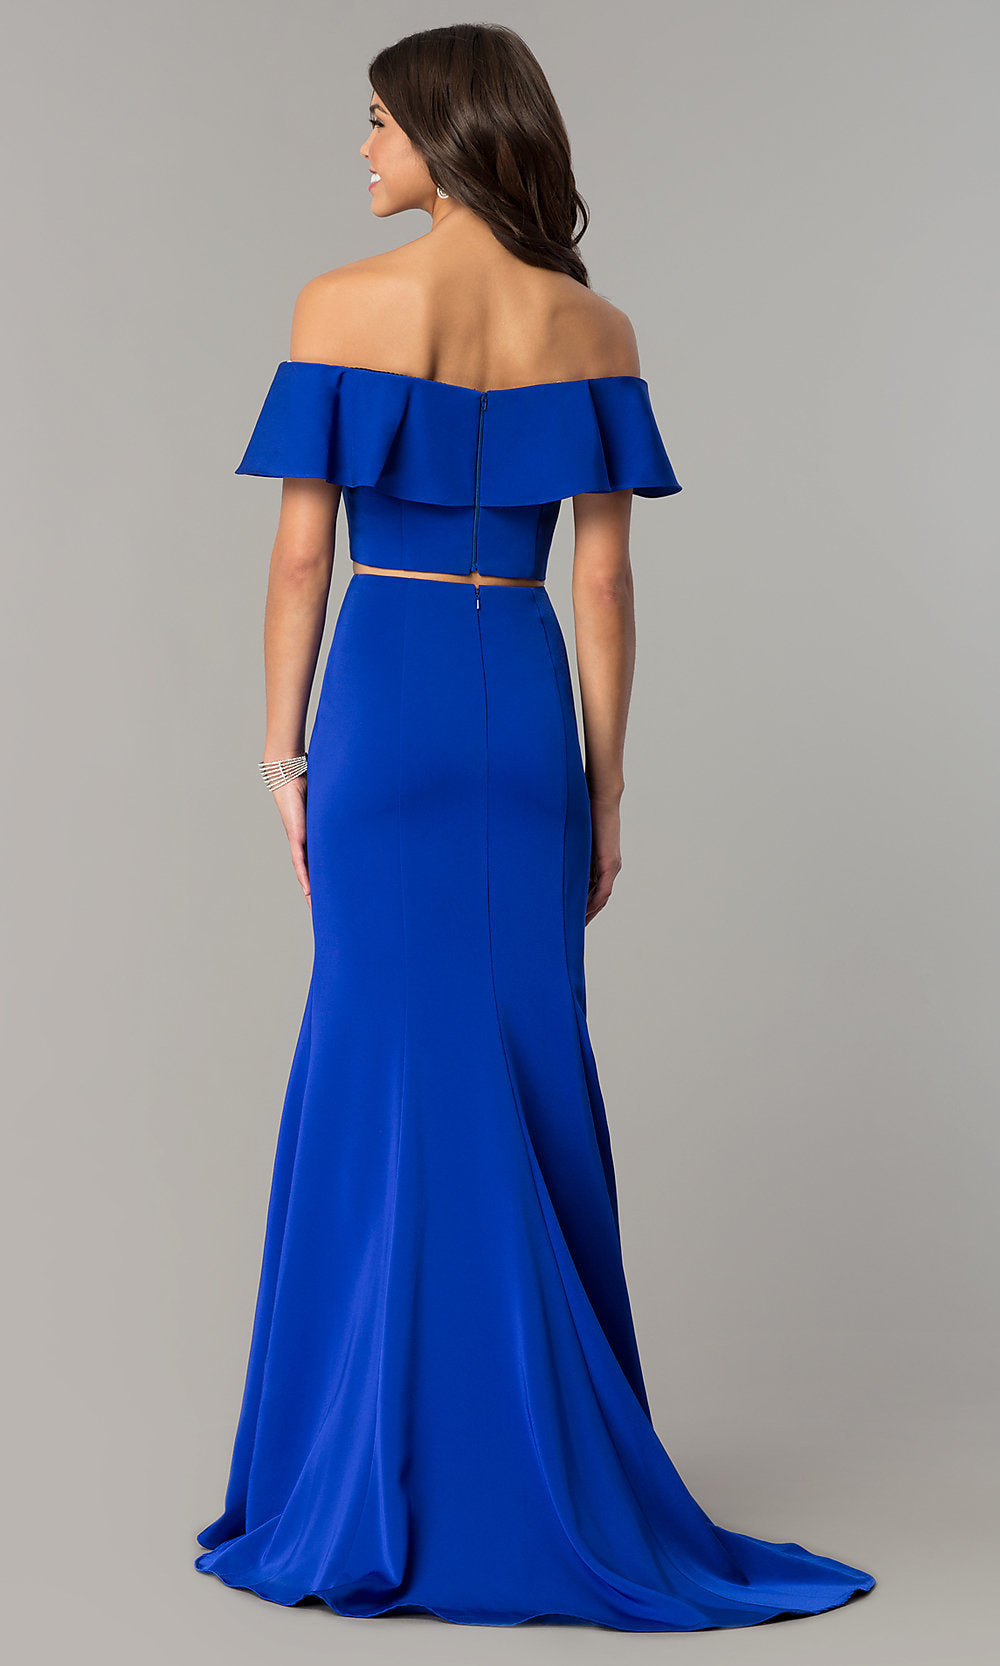 Off-the-Shoulder Two-Piece Prom Dress with Ruffle